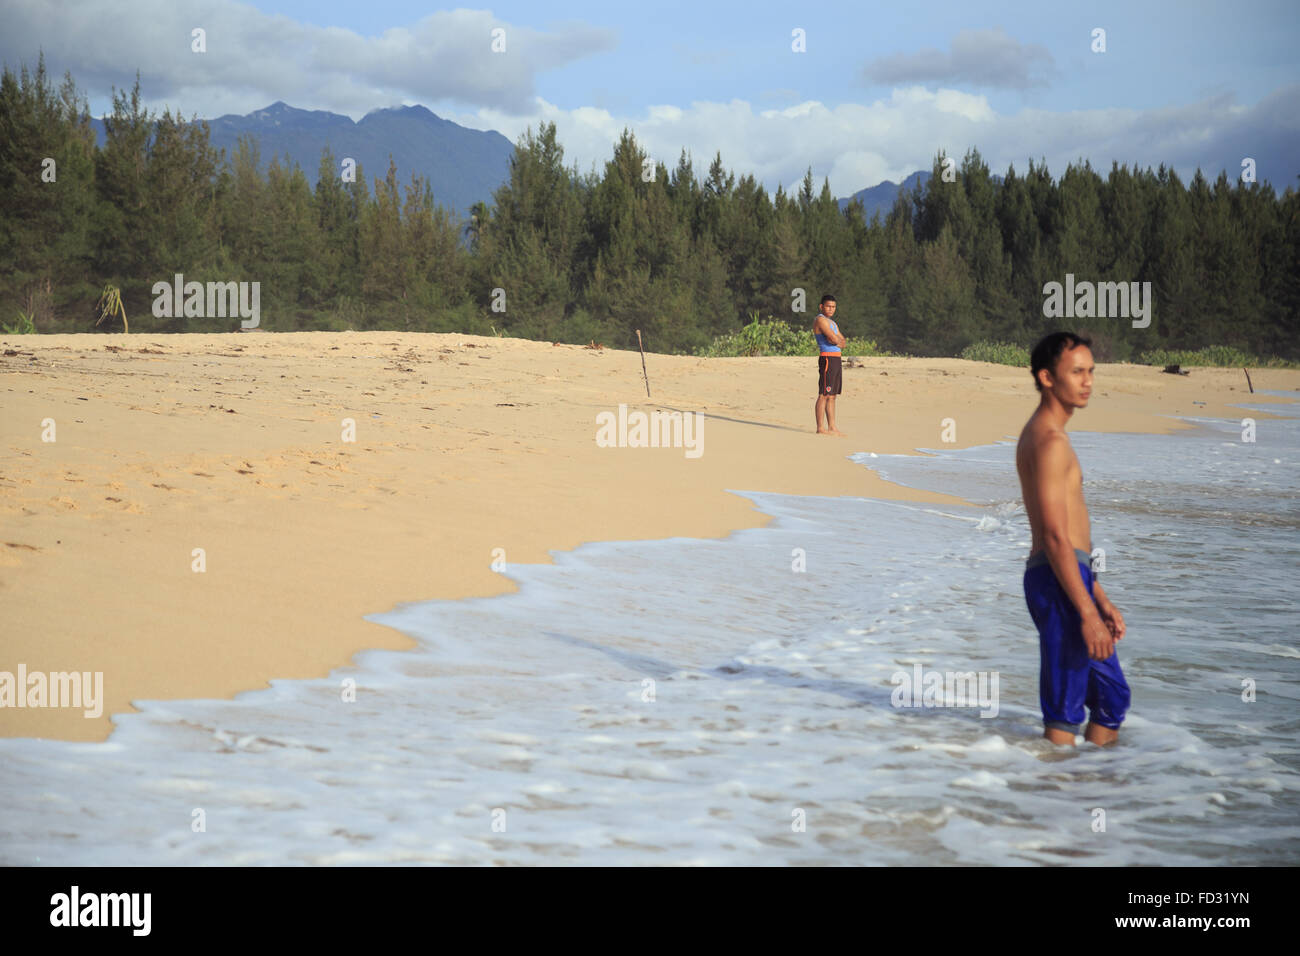 Acehnese people on Lampuuk beach Stock Photo